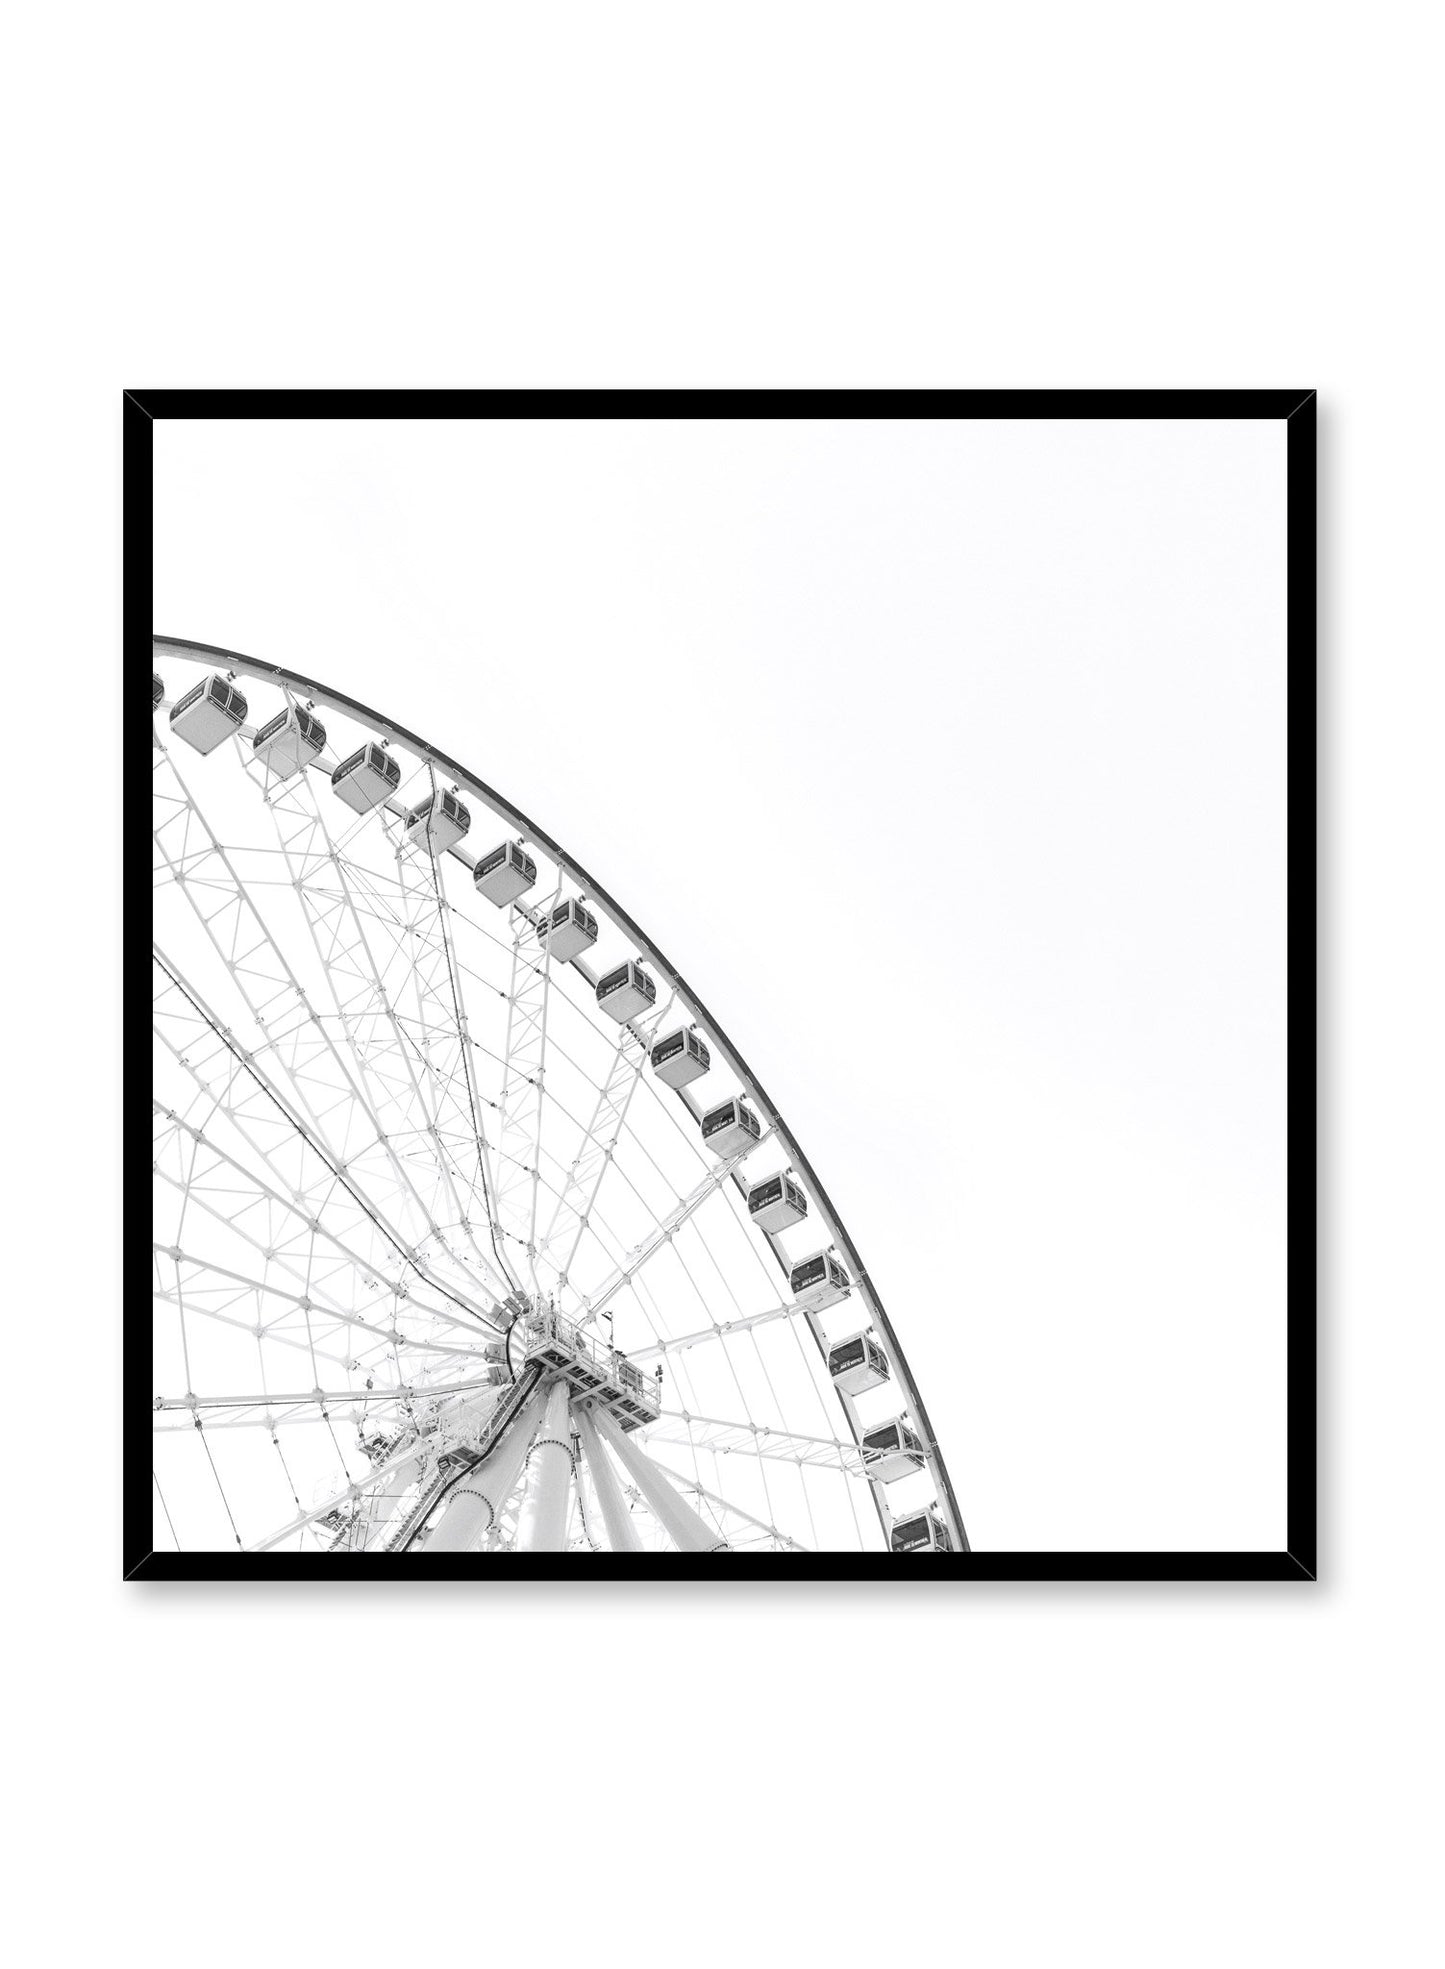 Minimalist design poster by Opposite Wall with urban photography of Montreal Grande Roue Ferris Wheel in square format